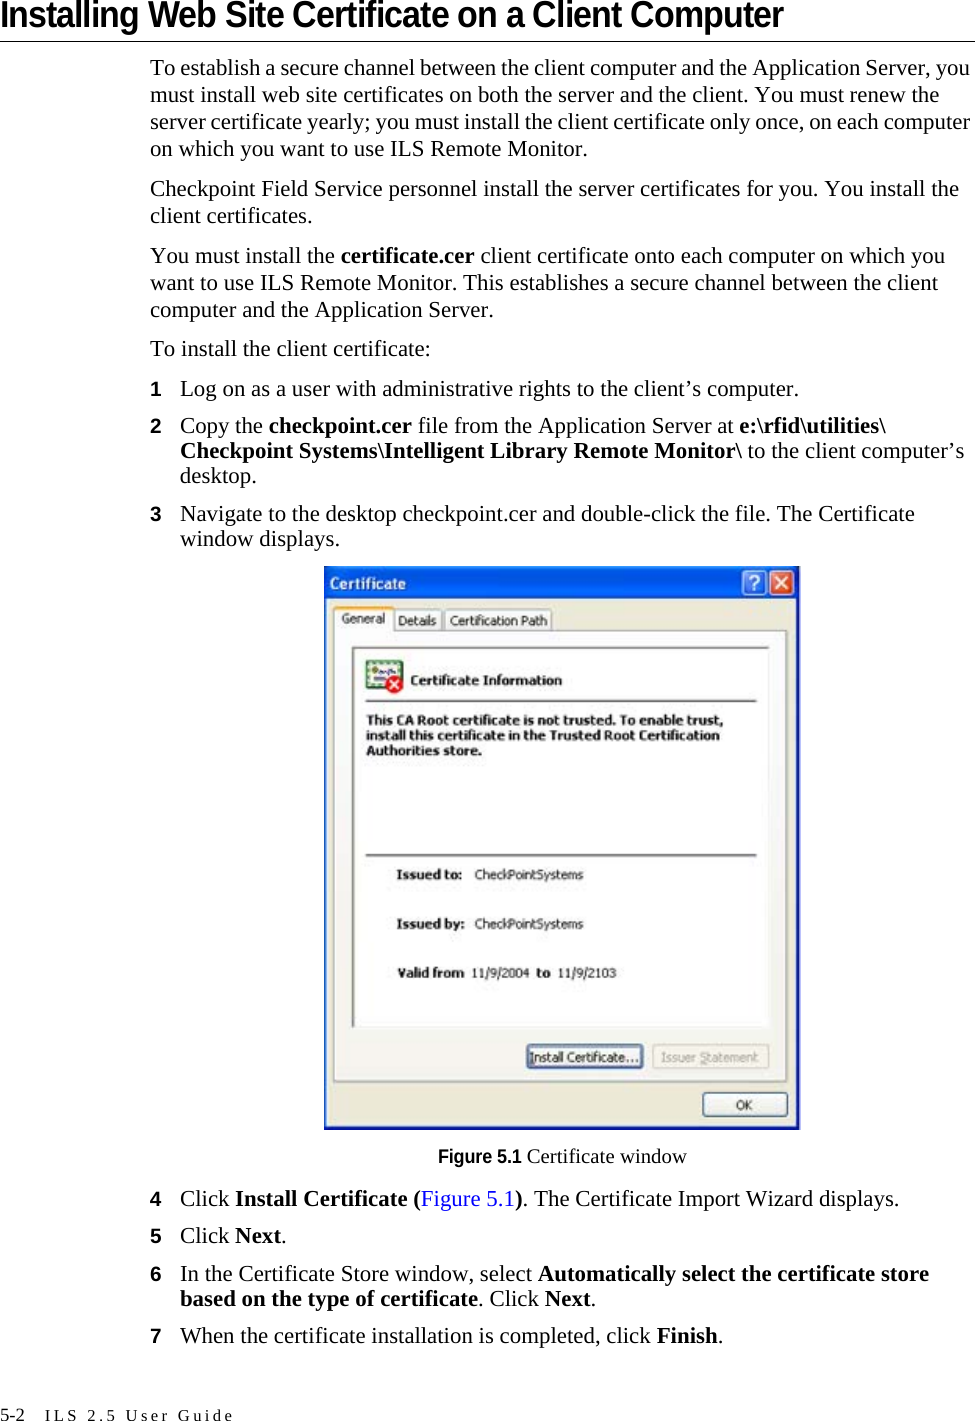 5-2 ILS 2.5 User GuideInstalling Web Site Certificate on a Client ComputerTo establish a secure channel between the client computer and the Application Server, you must install web site certificates on both the server and the client. You must renew the server certificate yearly; you must install the client certificate only once, on each computer on which you want to use ILS Remote Monitor.Checkpoint Field Service personnel install the server certificates for you. You install the client certificates. You must install the certificate.cer client certificate onto each computer on which you want to use ILS Remote Monitor. This establishes a secure channel between the client computer and the Application Server.To install the client certificate:1Log on as a user with administrative rights to the client’s computer.2Copy the checkpoint.cer file from the Application Server at e:\rfid\utilities\Checkpoint Systems\Intelligent Library Remote Monitor\ to the client computer’s desktop.3Navigate to the desktop checkpoint.cer and double-click the file. The Certificate window displays.Figure 5.1 Certificate window4Click Install Certificate (Figure 5.1). The Certificate Import Wizard displays.5Click Next.6In the Certificate Store window, select Automatically select the certificate store based on the type of certificate. Click Next.7When the certificate installation is completed, click Finish.